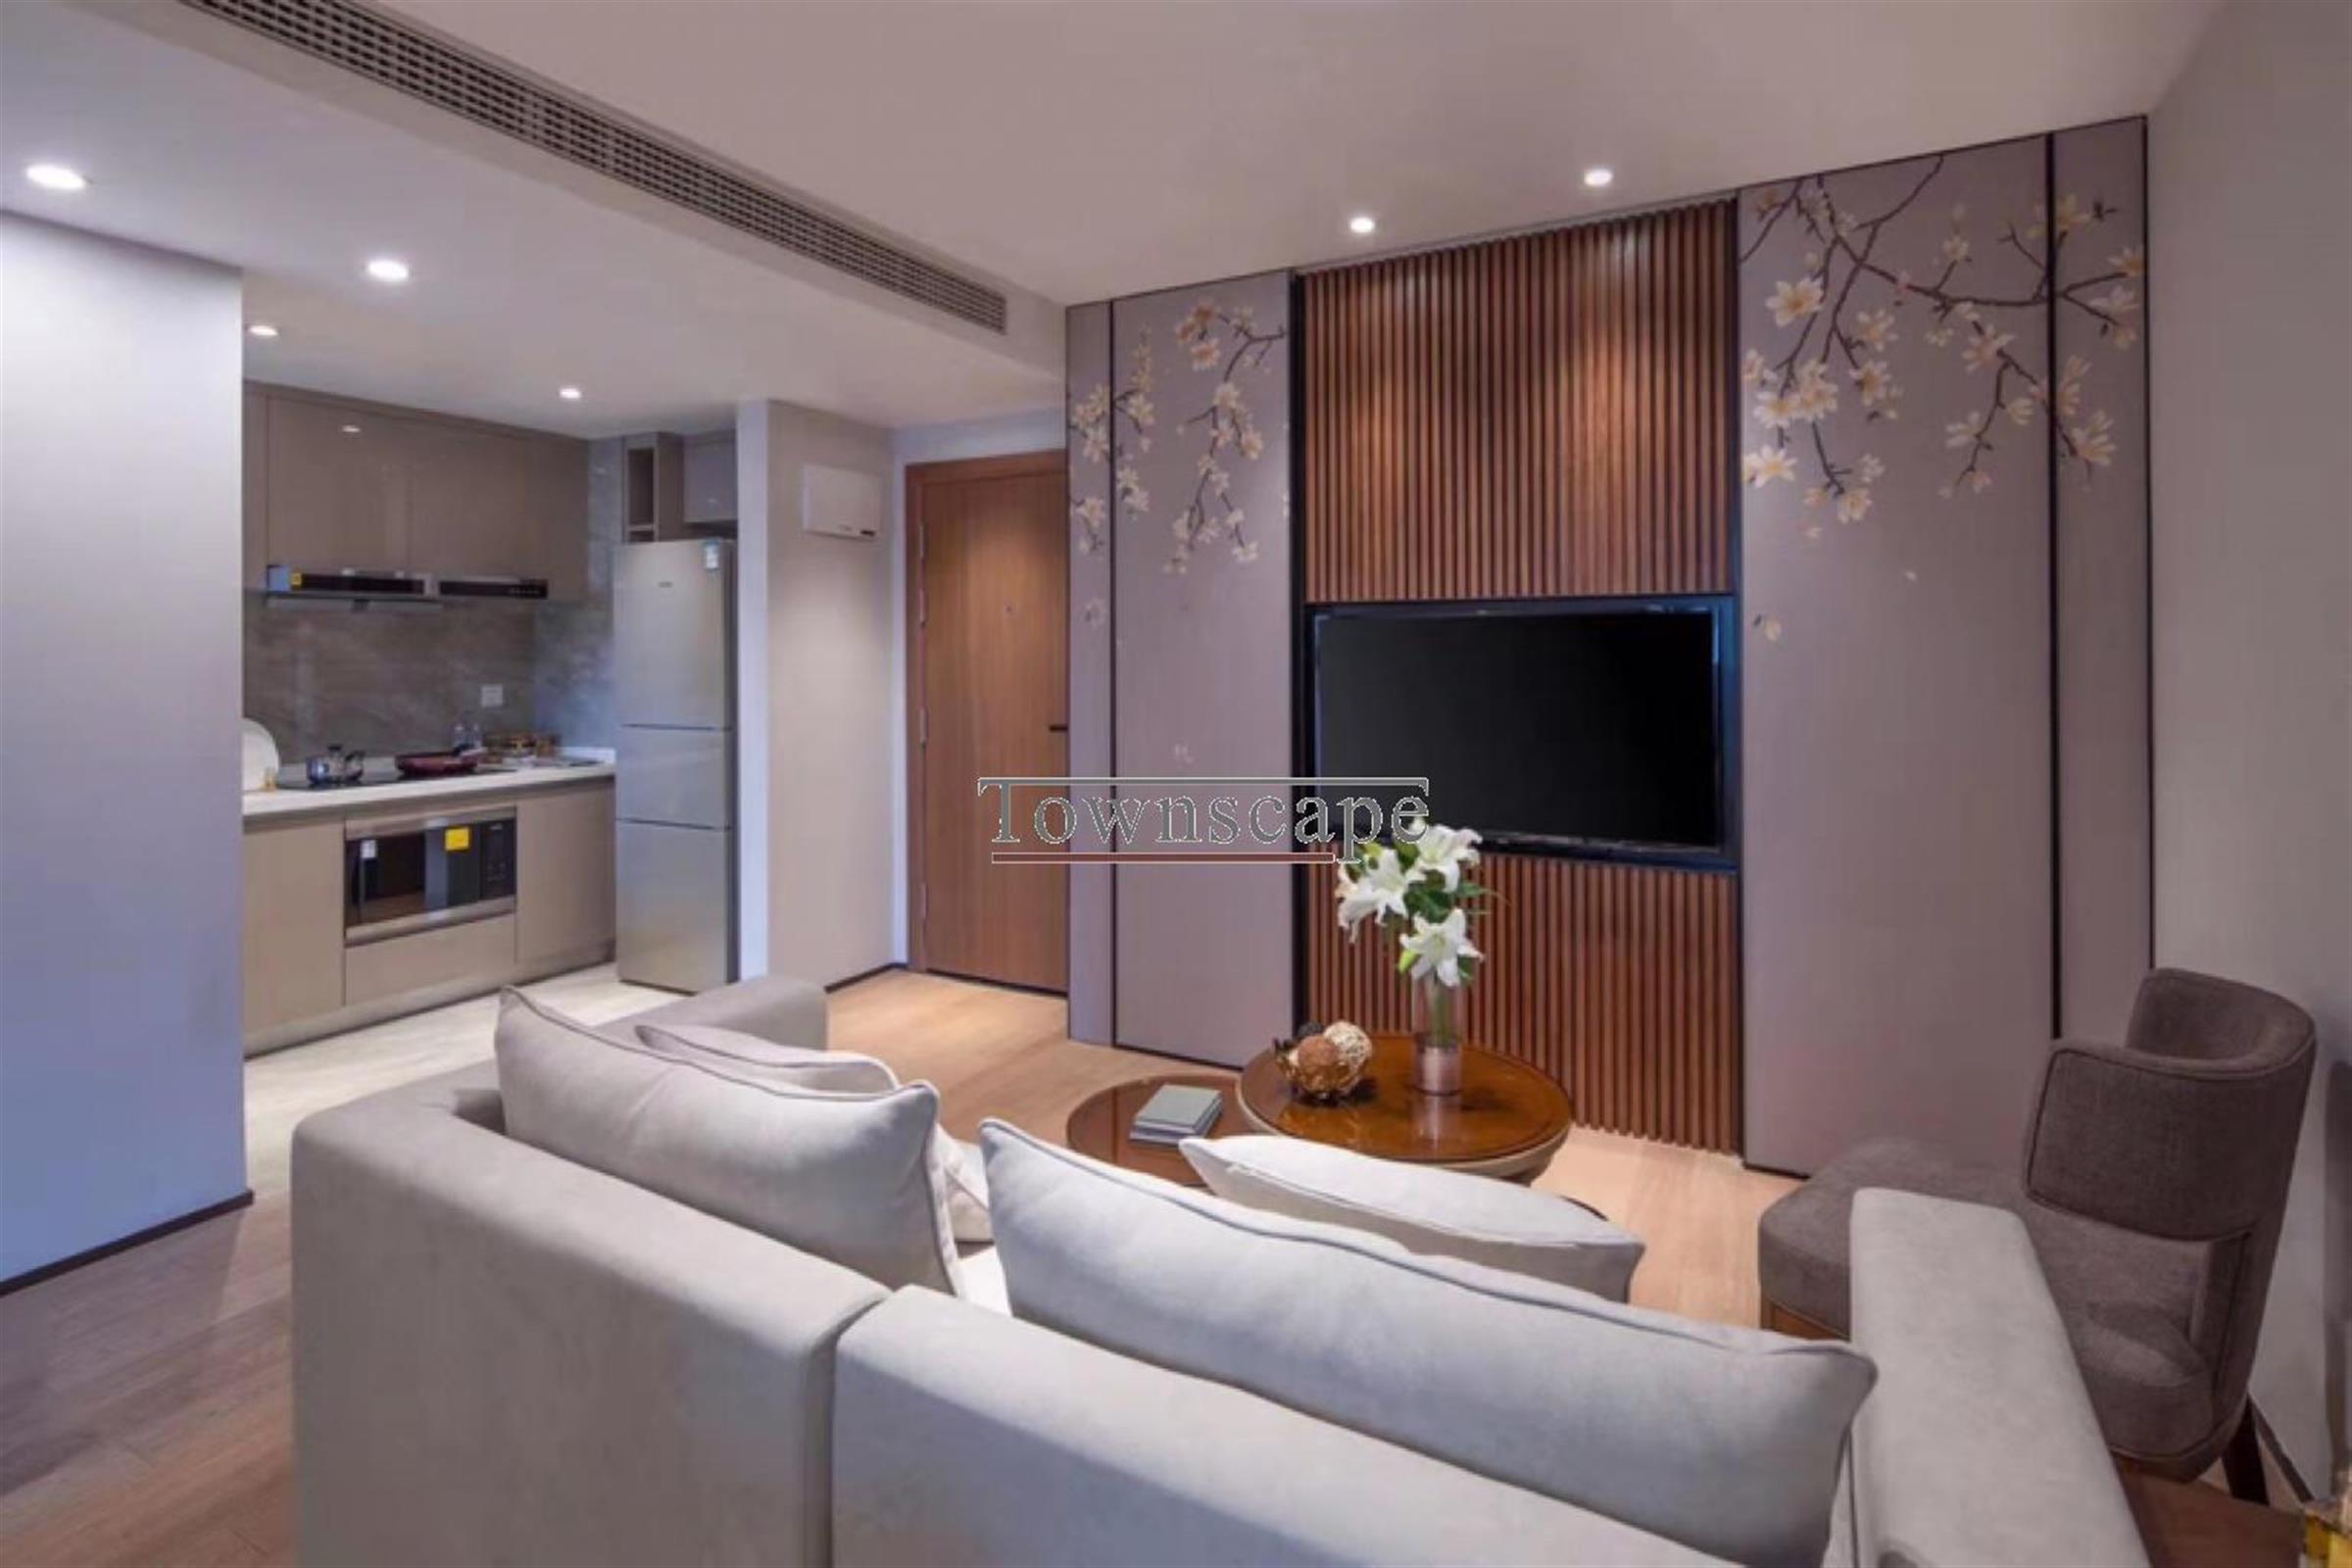 open design Beautifully Decorated, Newly Opened 2BR Service Apartments in Jing